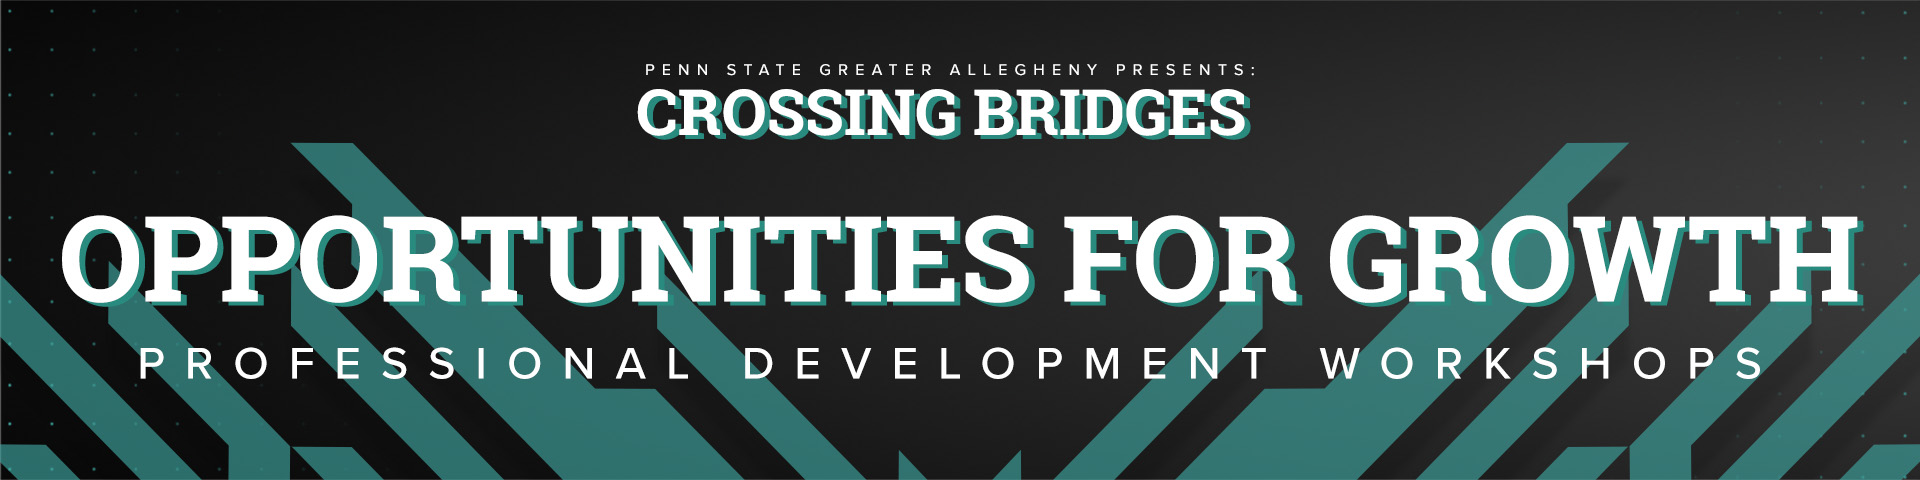 Penn State Greater Allegheny Presents: Crossing Bridges - Opportunities for Growth: Professional Development Workshops